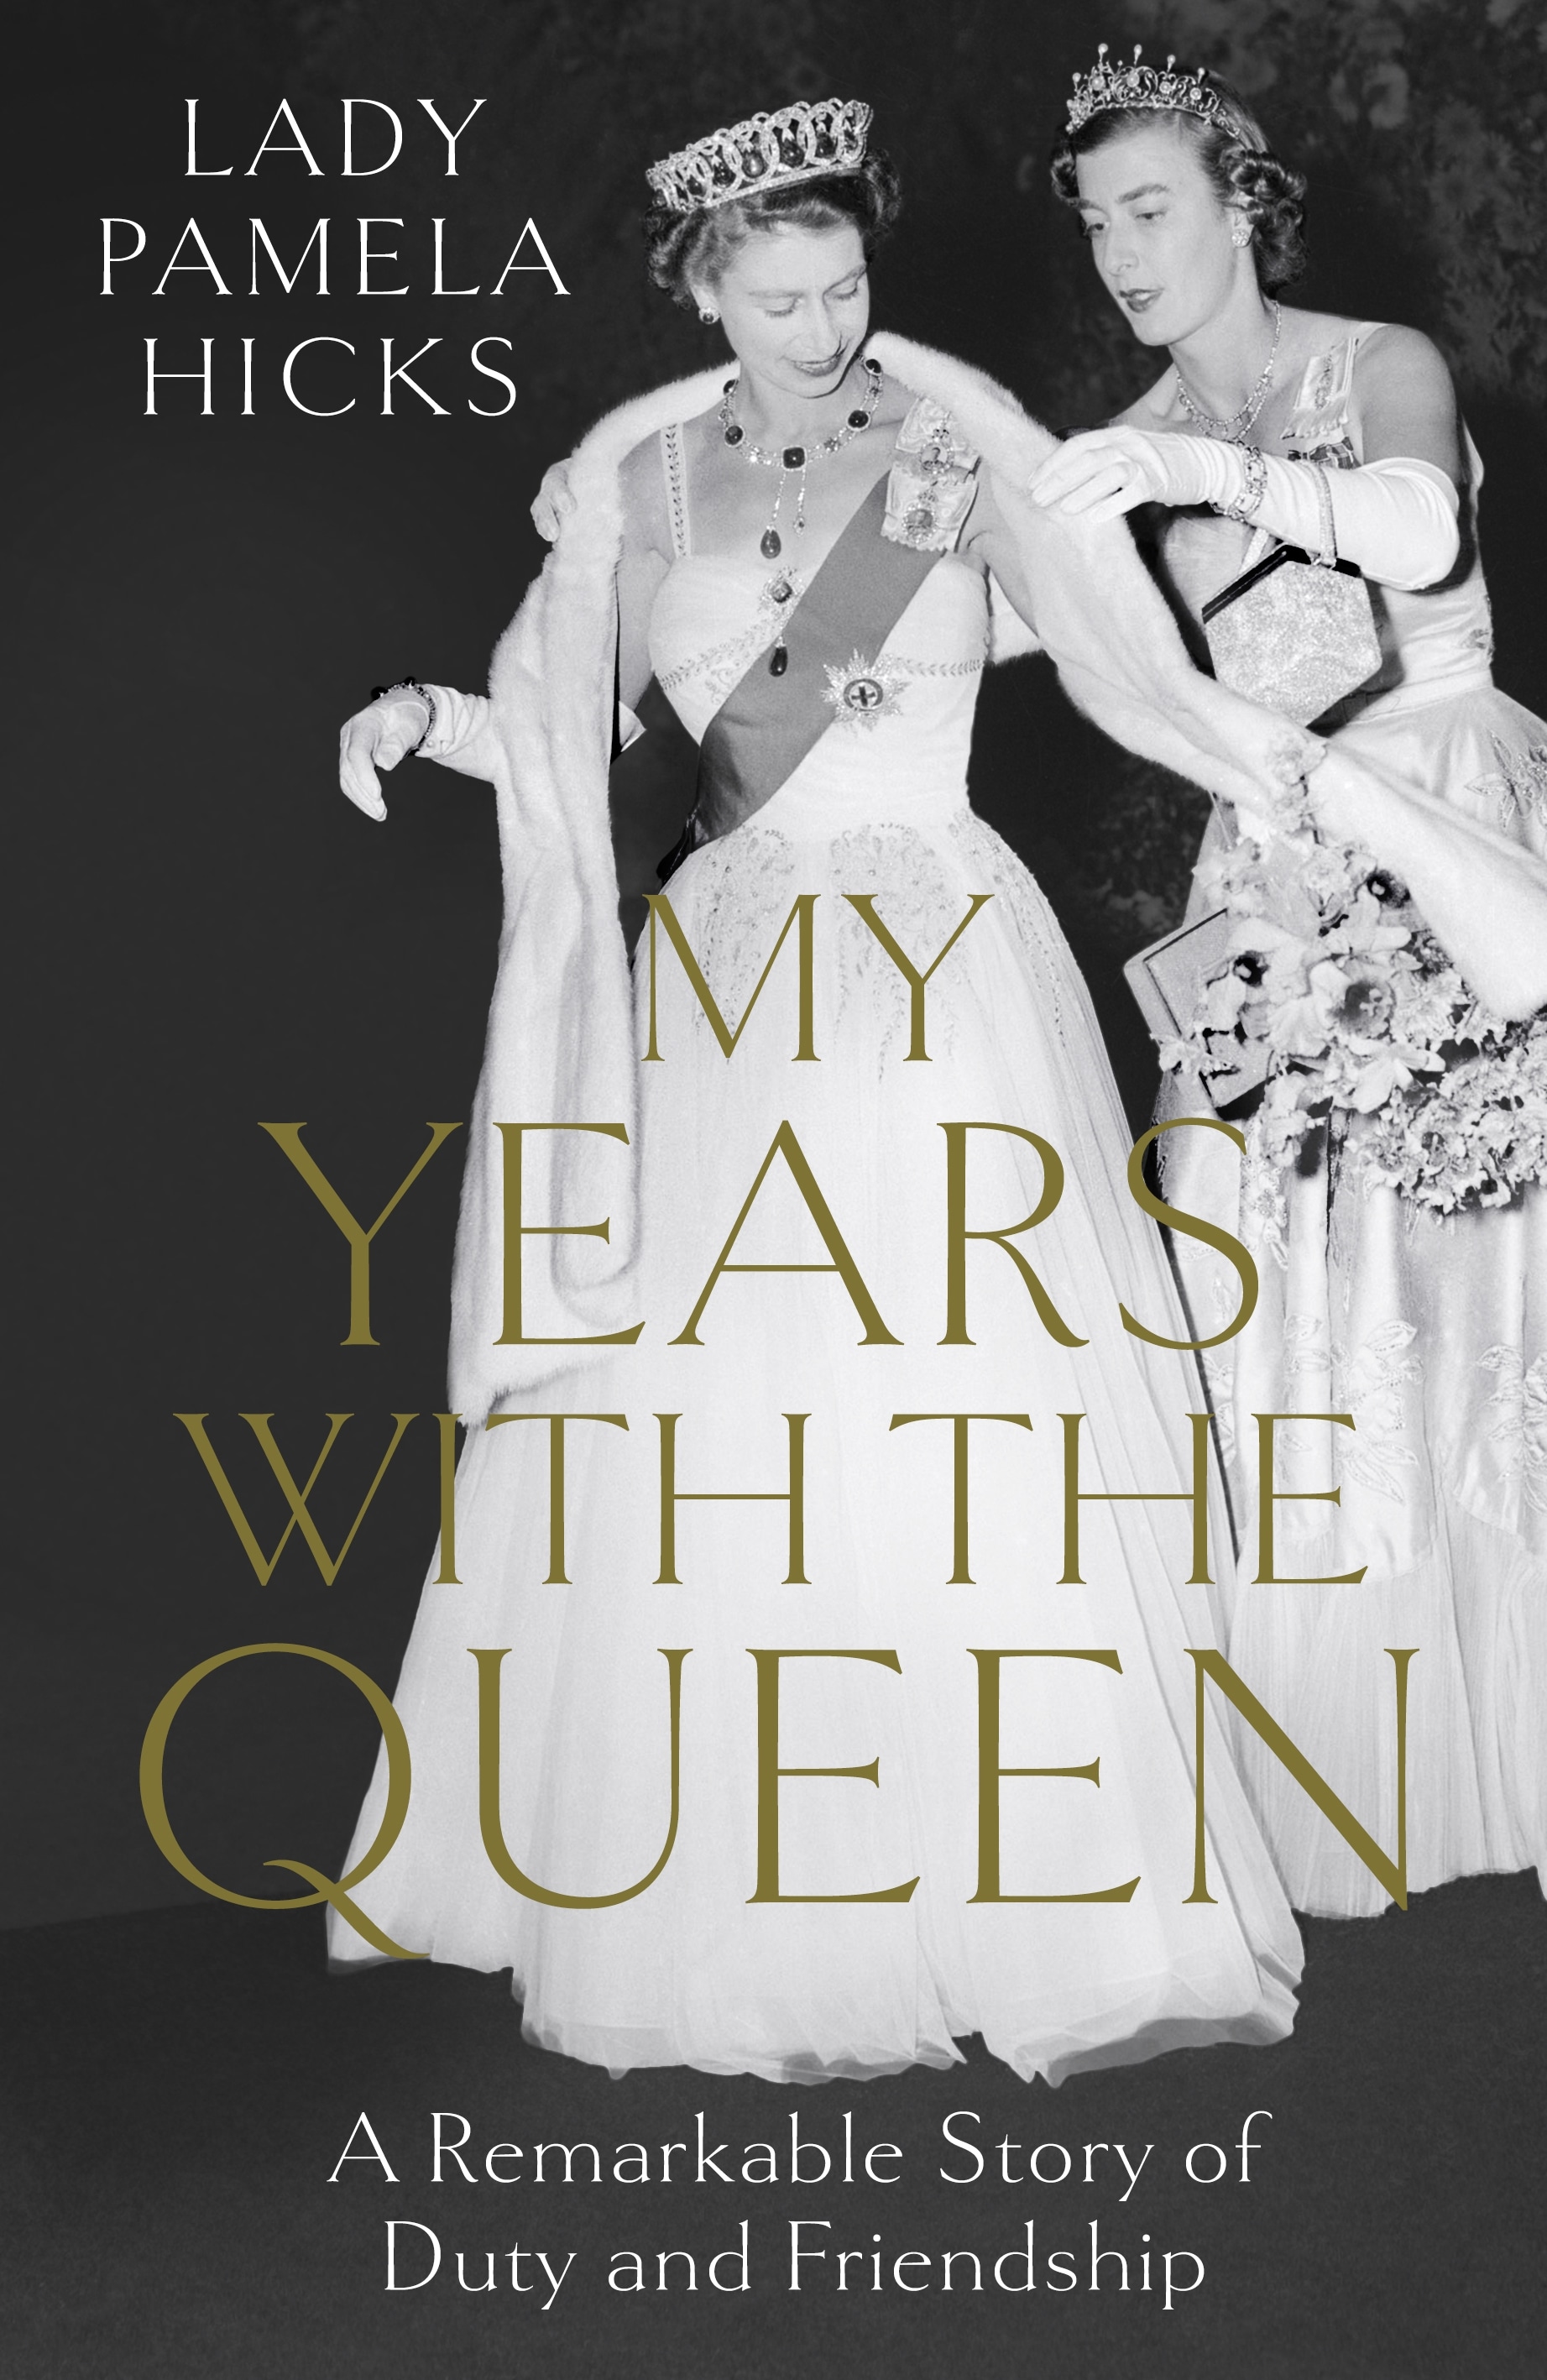 Book “My Years with the Queen” by Lady Pamela Hicks — May 19, 2022